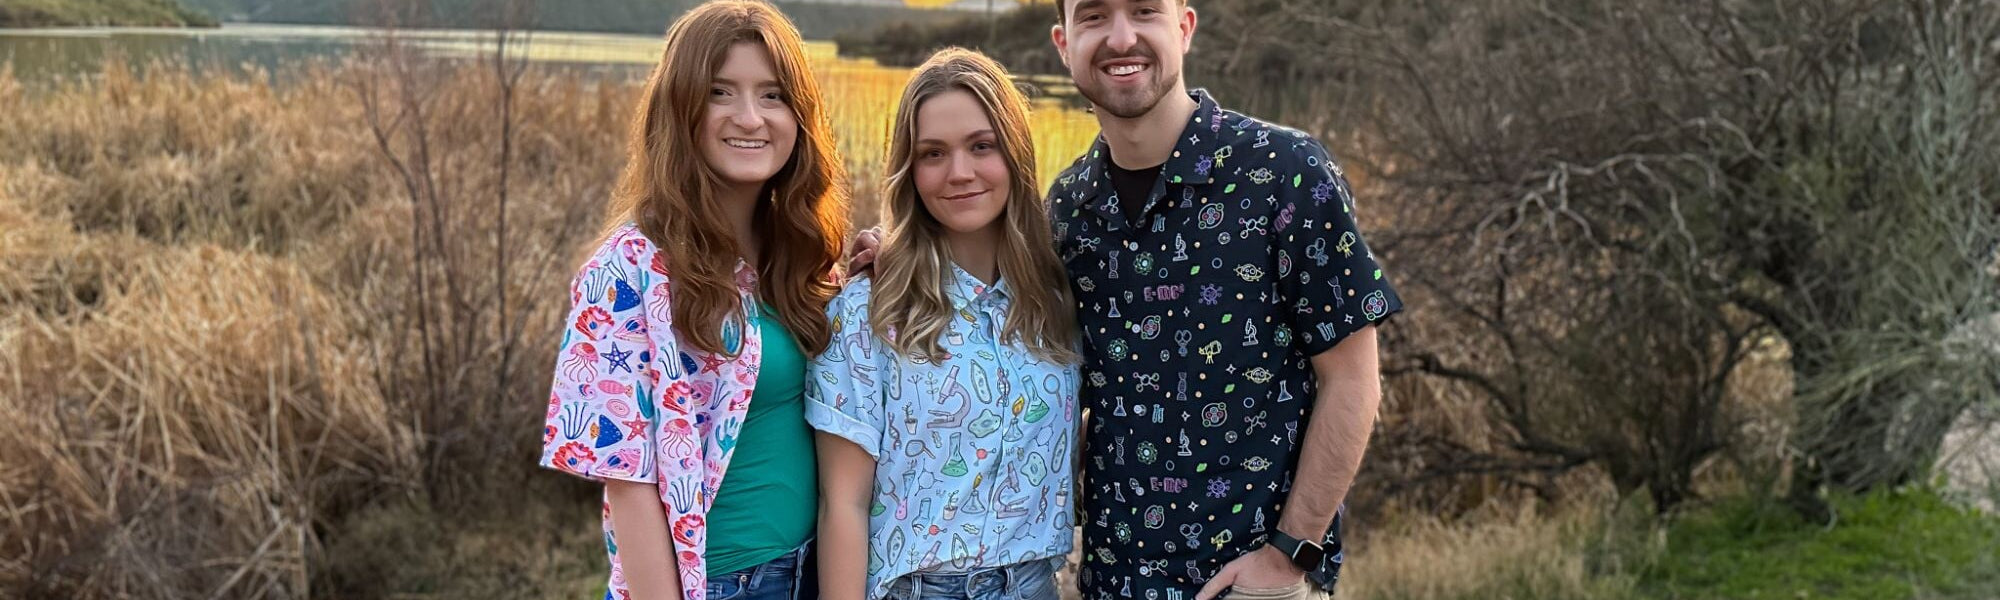 Three people wearing science themed button up shirts at a lake during sunset. The first person is wearing marine biology designs, the second person is wearing a bio-engineering button down shirt, and the third person is wearing a dark blue science shirt.